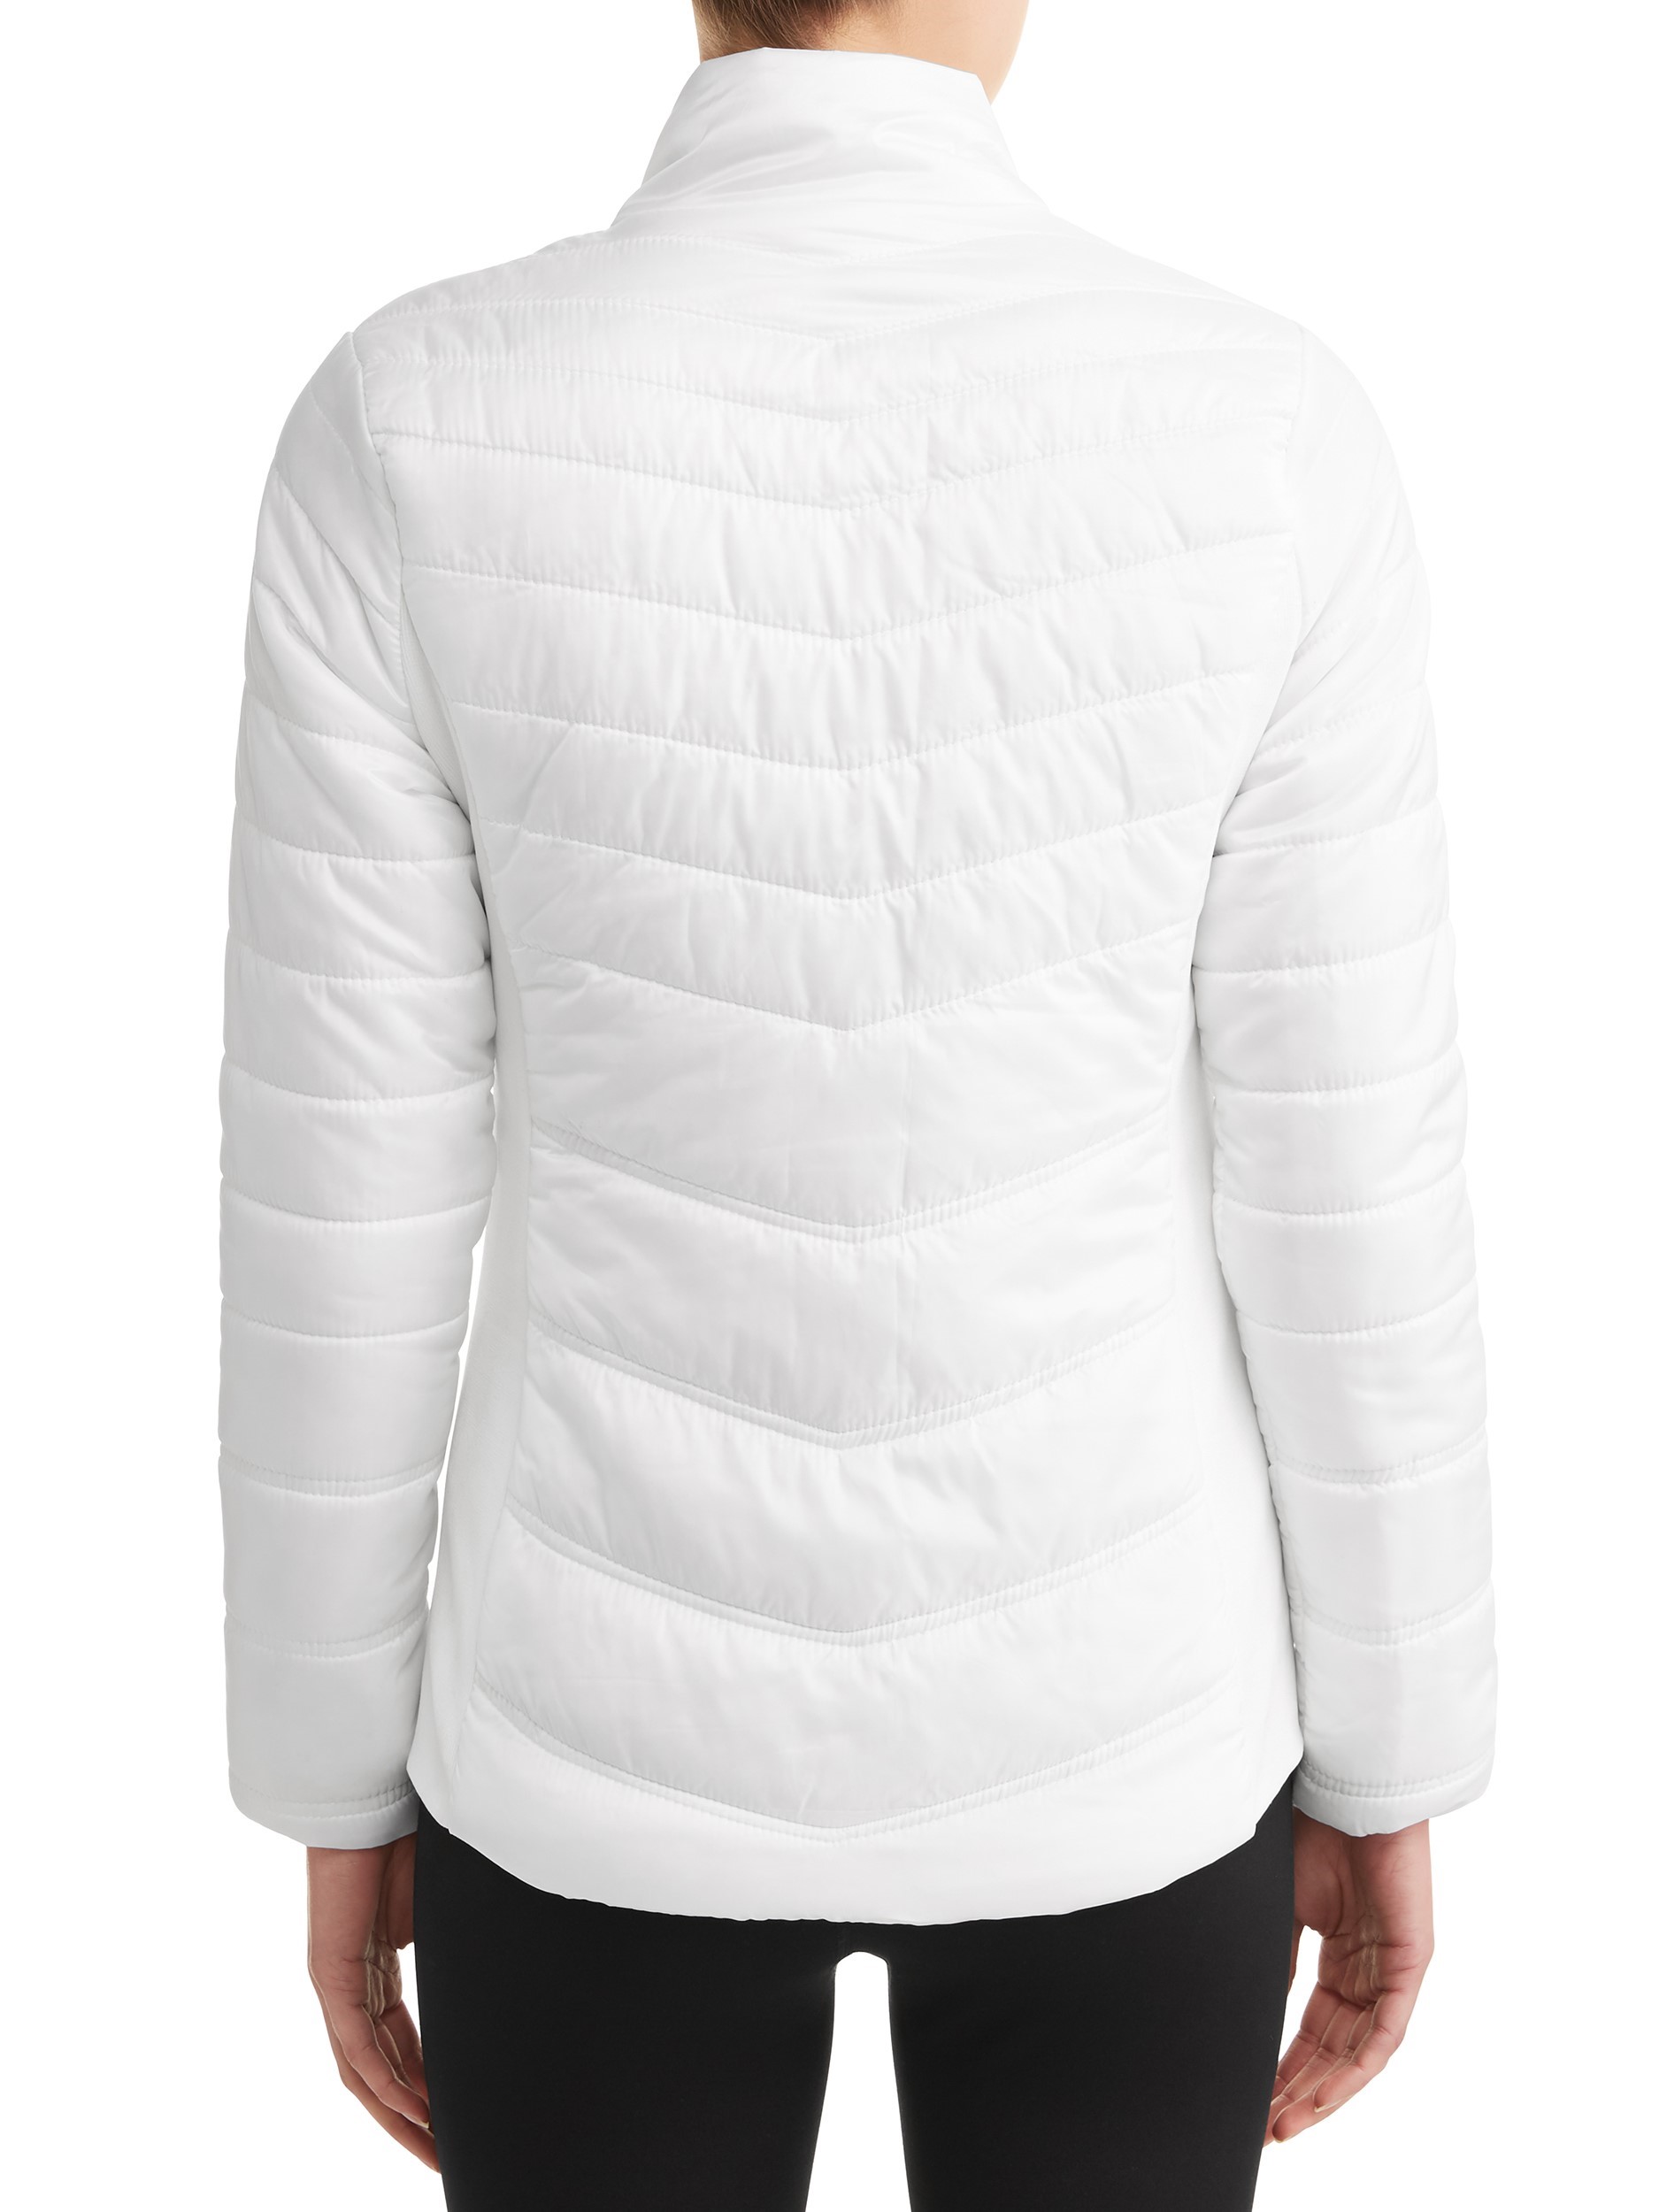 Women's Active Quilted Puffer Jacket - image 2 of 4